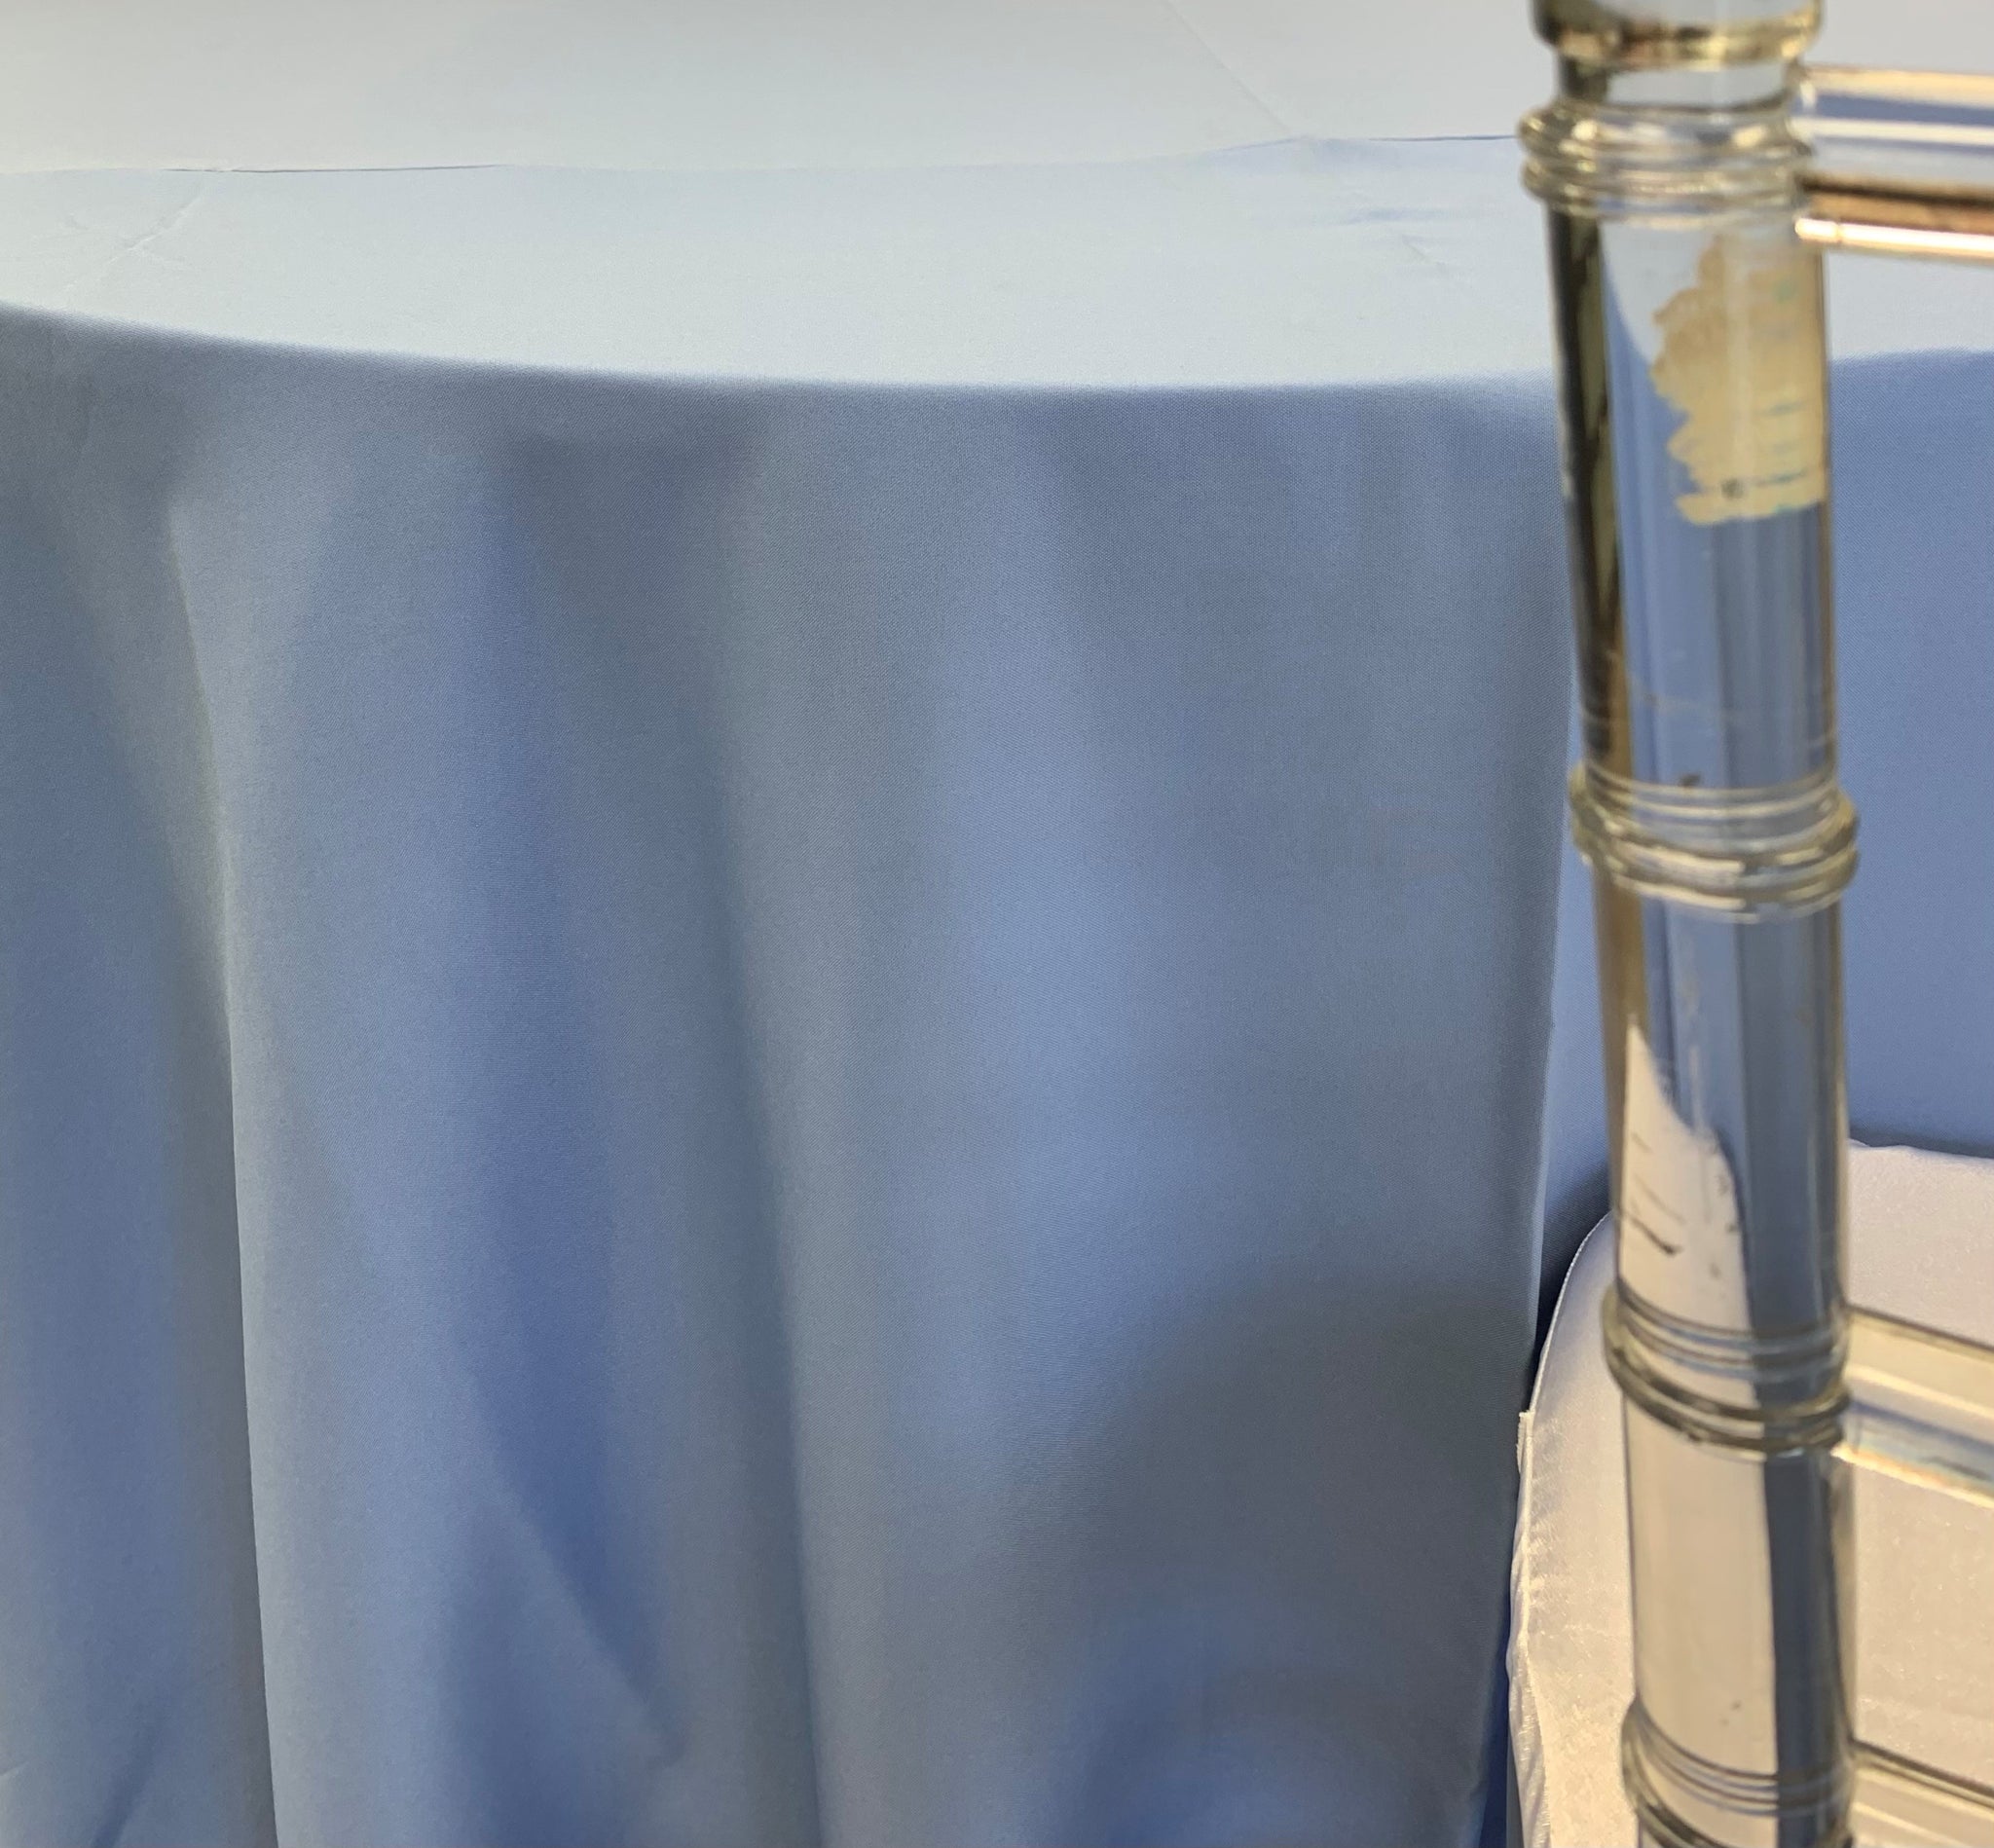 Polyester Periwinkle Table Linen